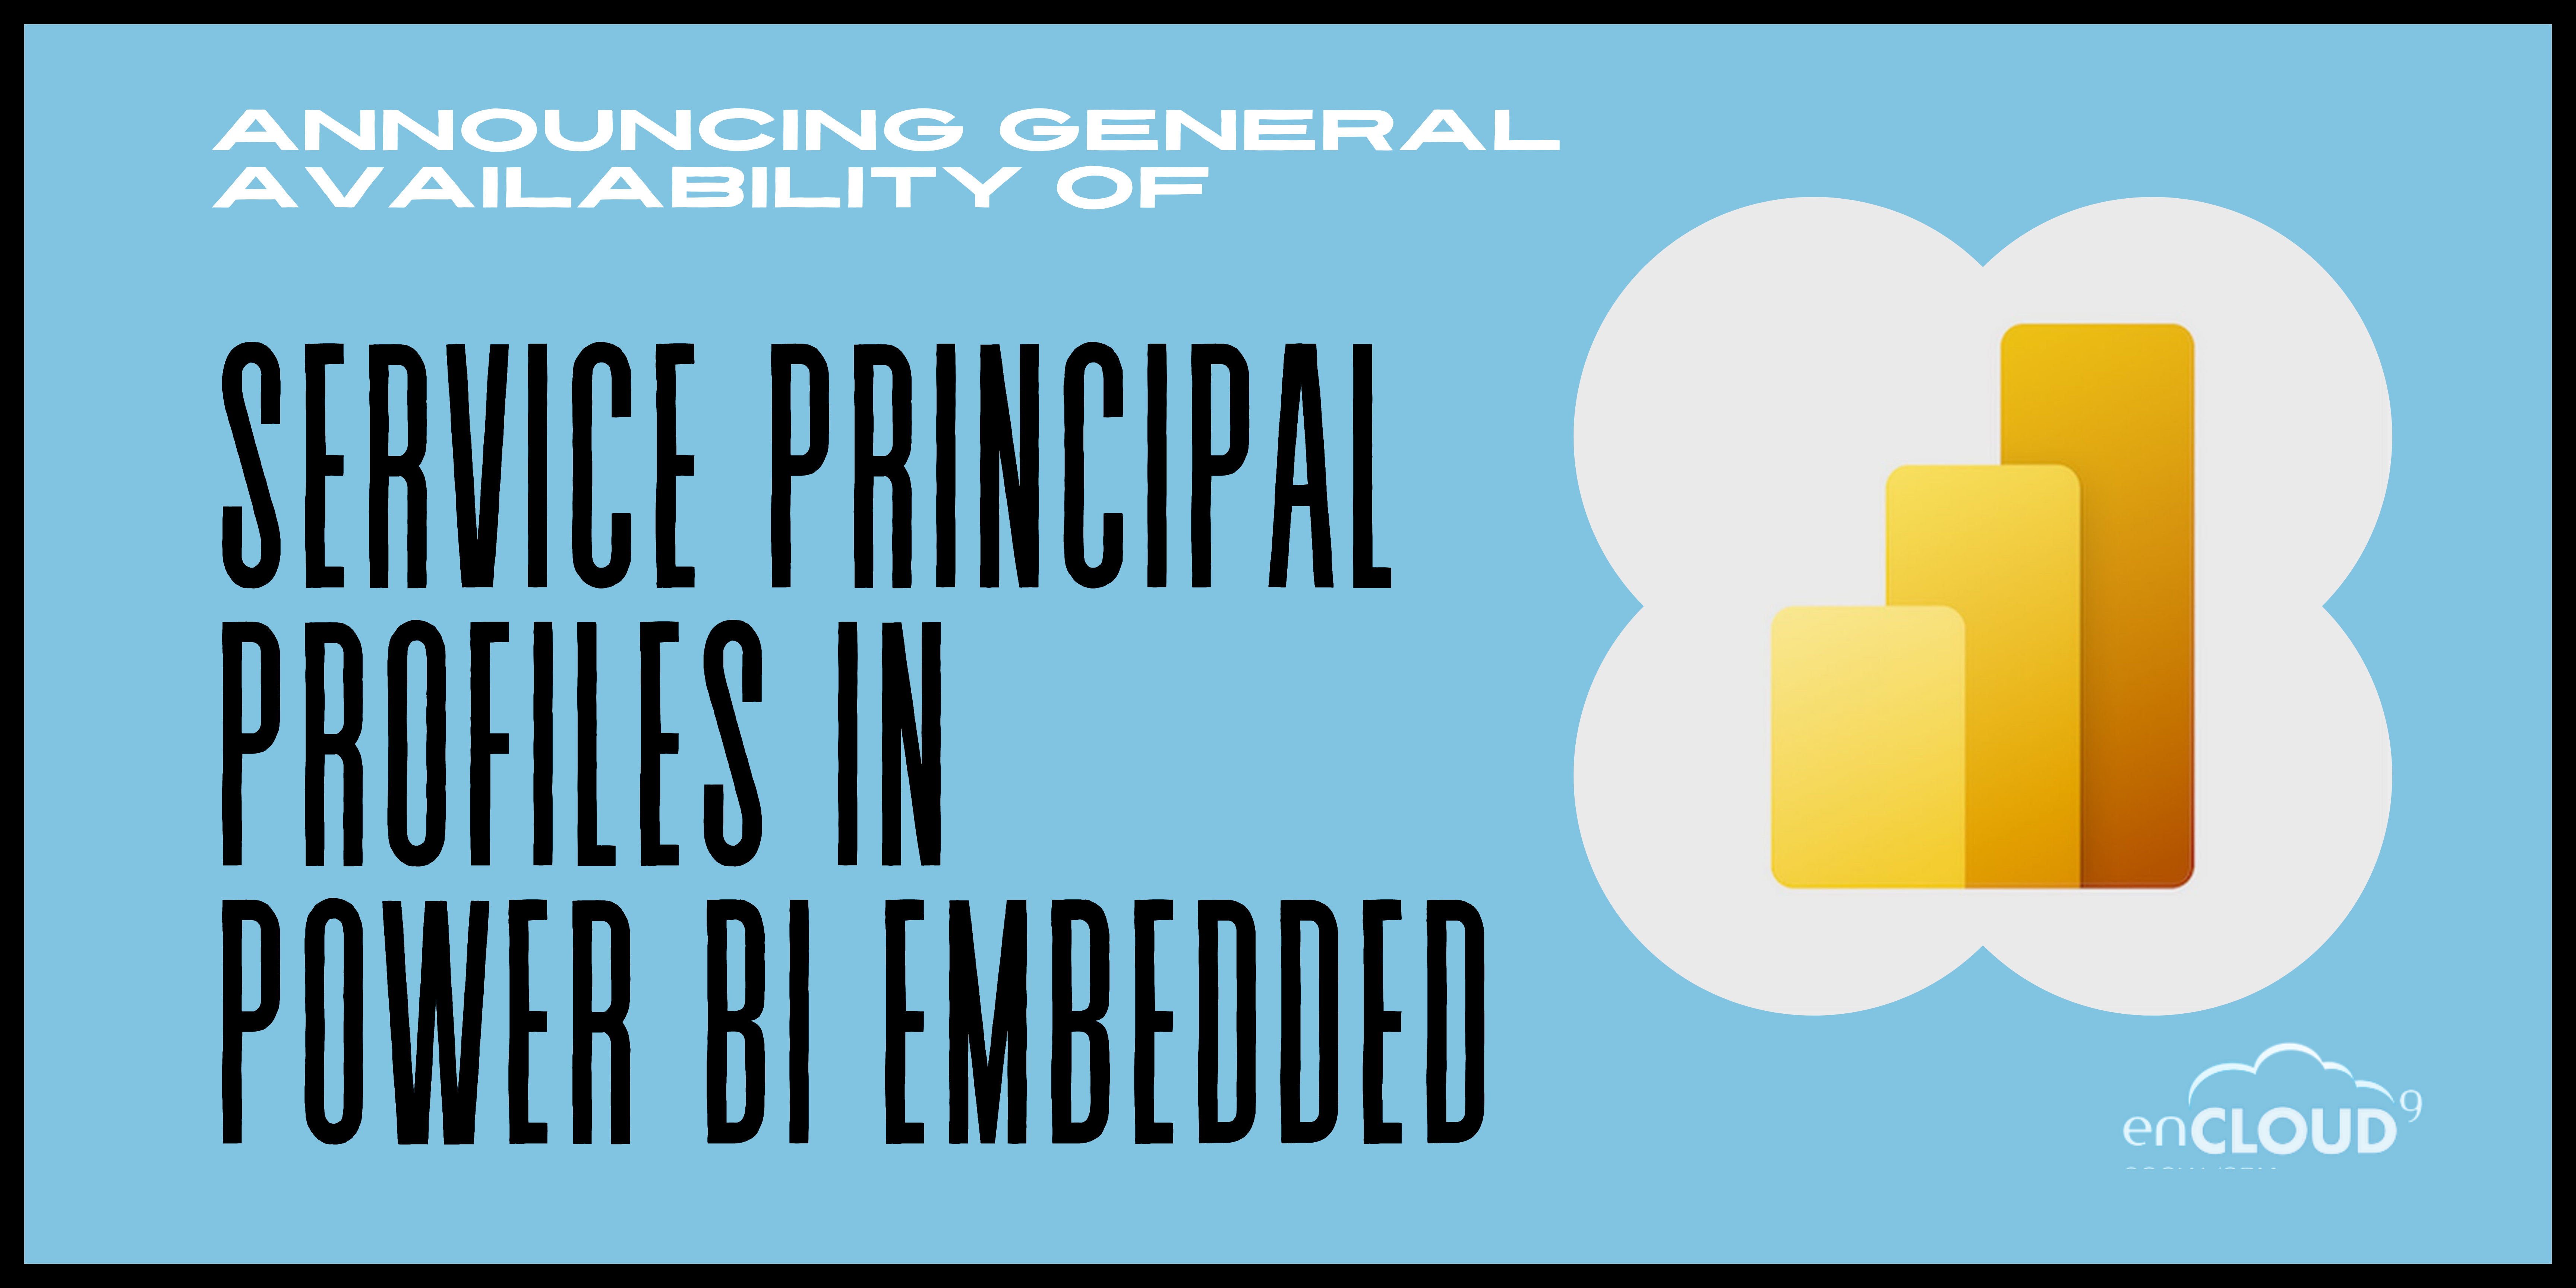 Service Principal Profiles in Power BI Embedded Now Generally Available